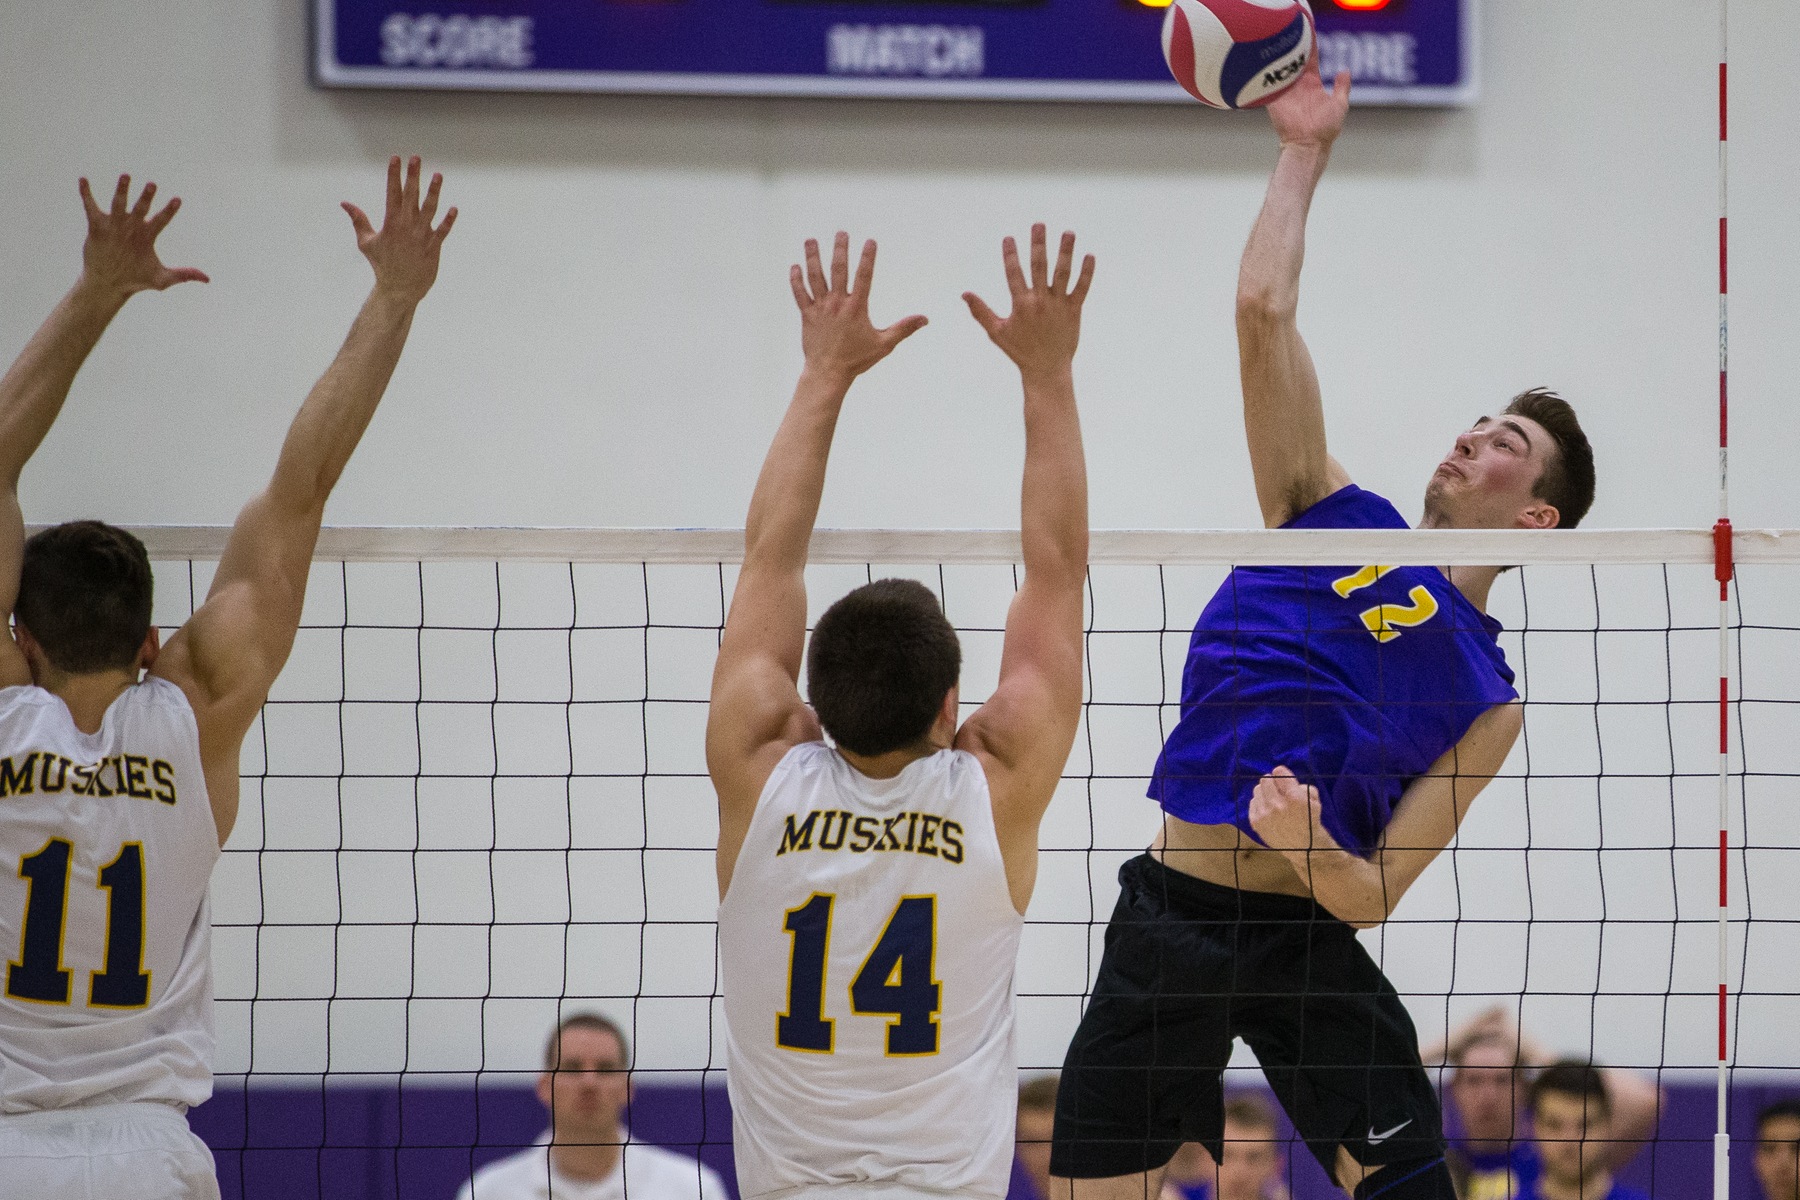 Cal Lutheran Edges Wentworth to Stay Perfect on Road Trip